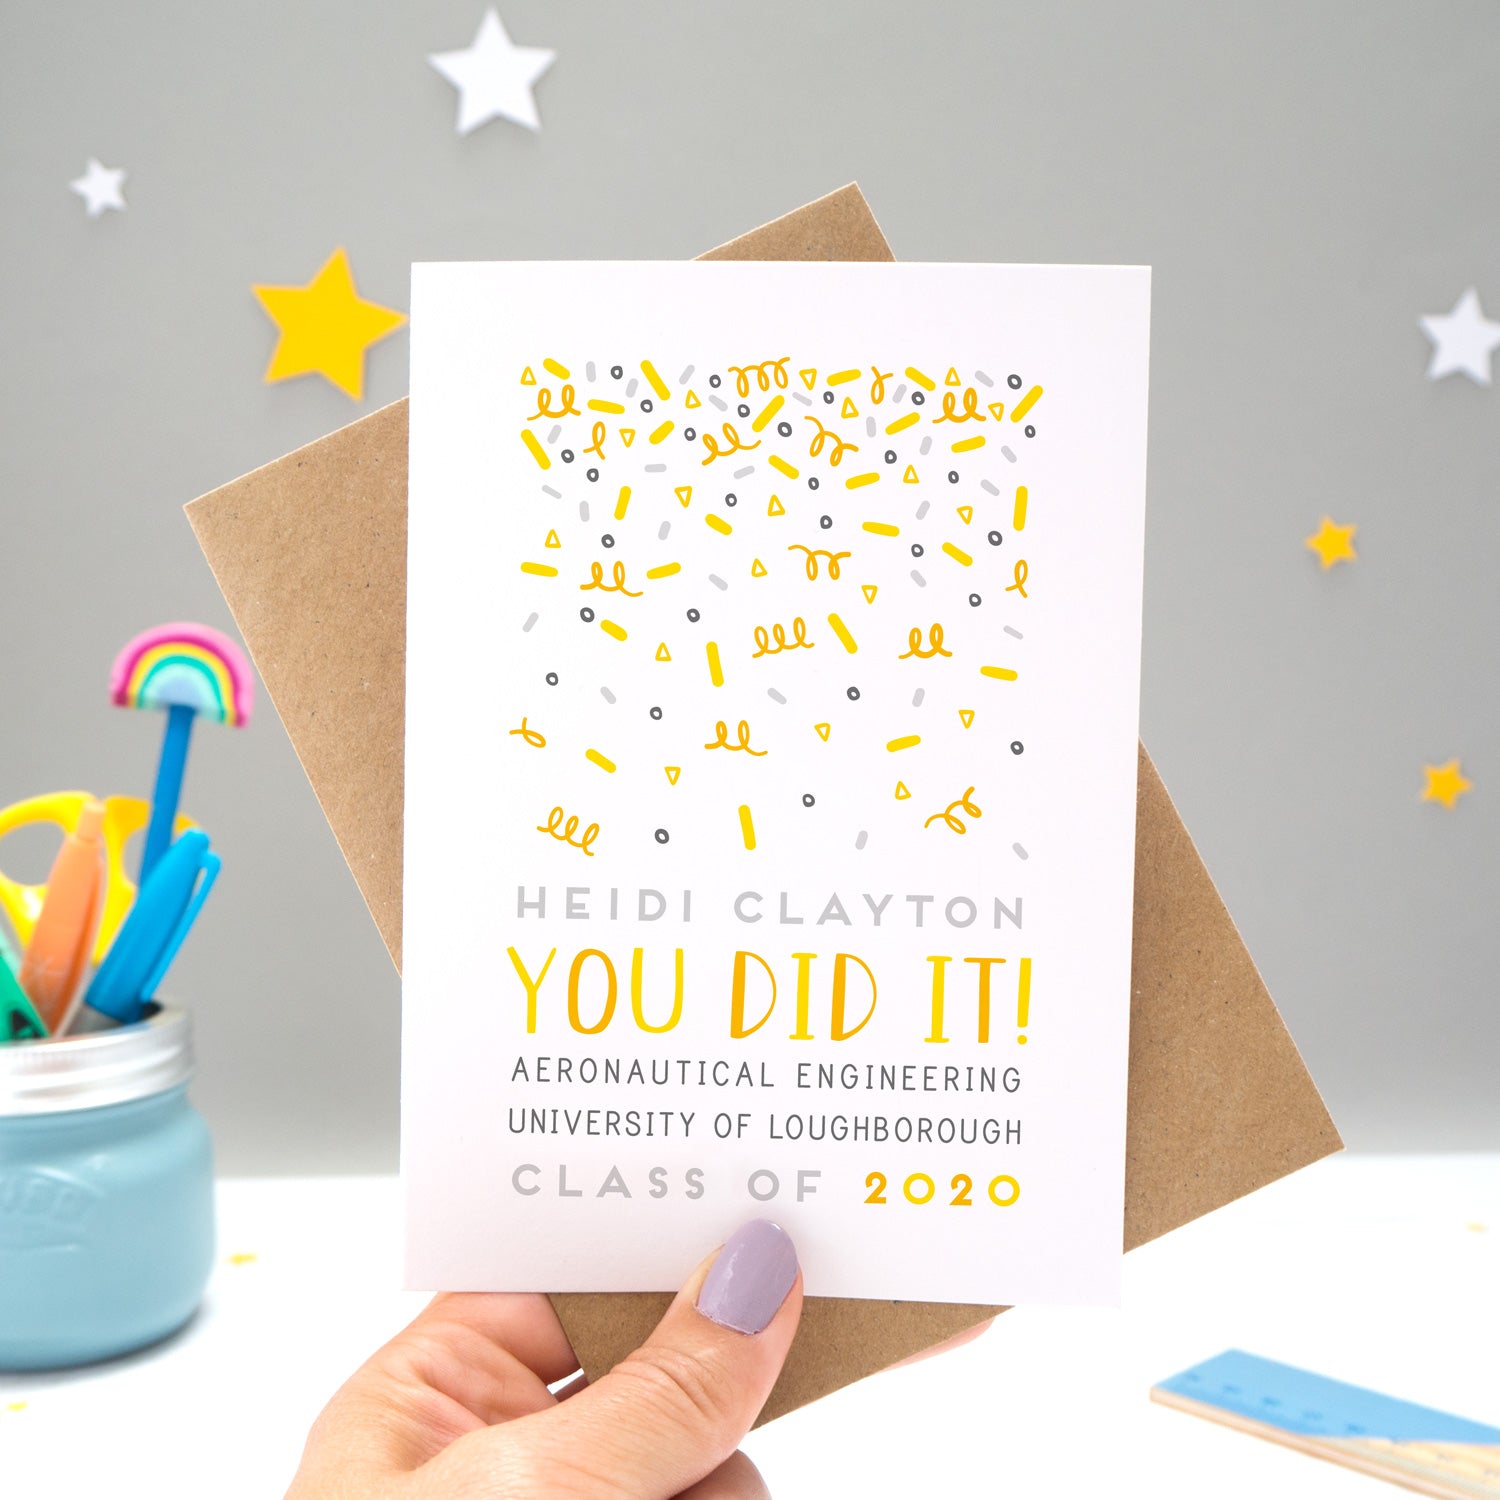 A personalised graduation card designed and made by Joanne Hawker in her somerset studio being held against a kraft brown envelope over a grey background with yellow and white stars. The confetti illustration and text is in varying tones of grey, yellow and orange.